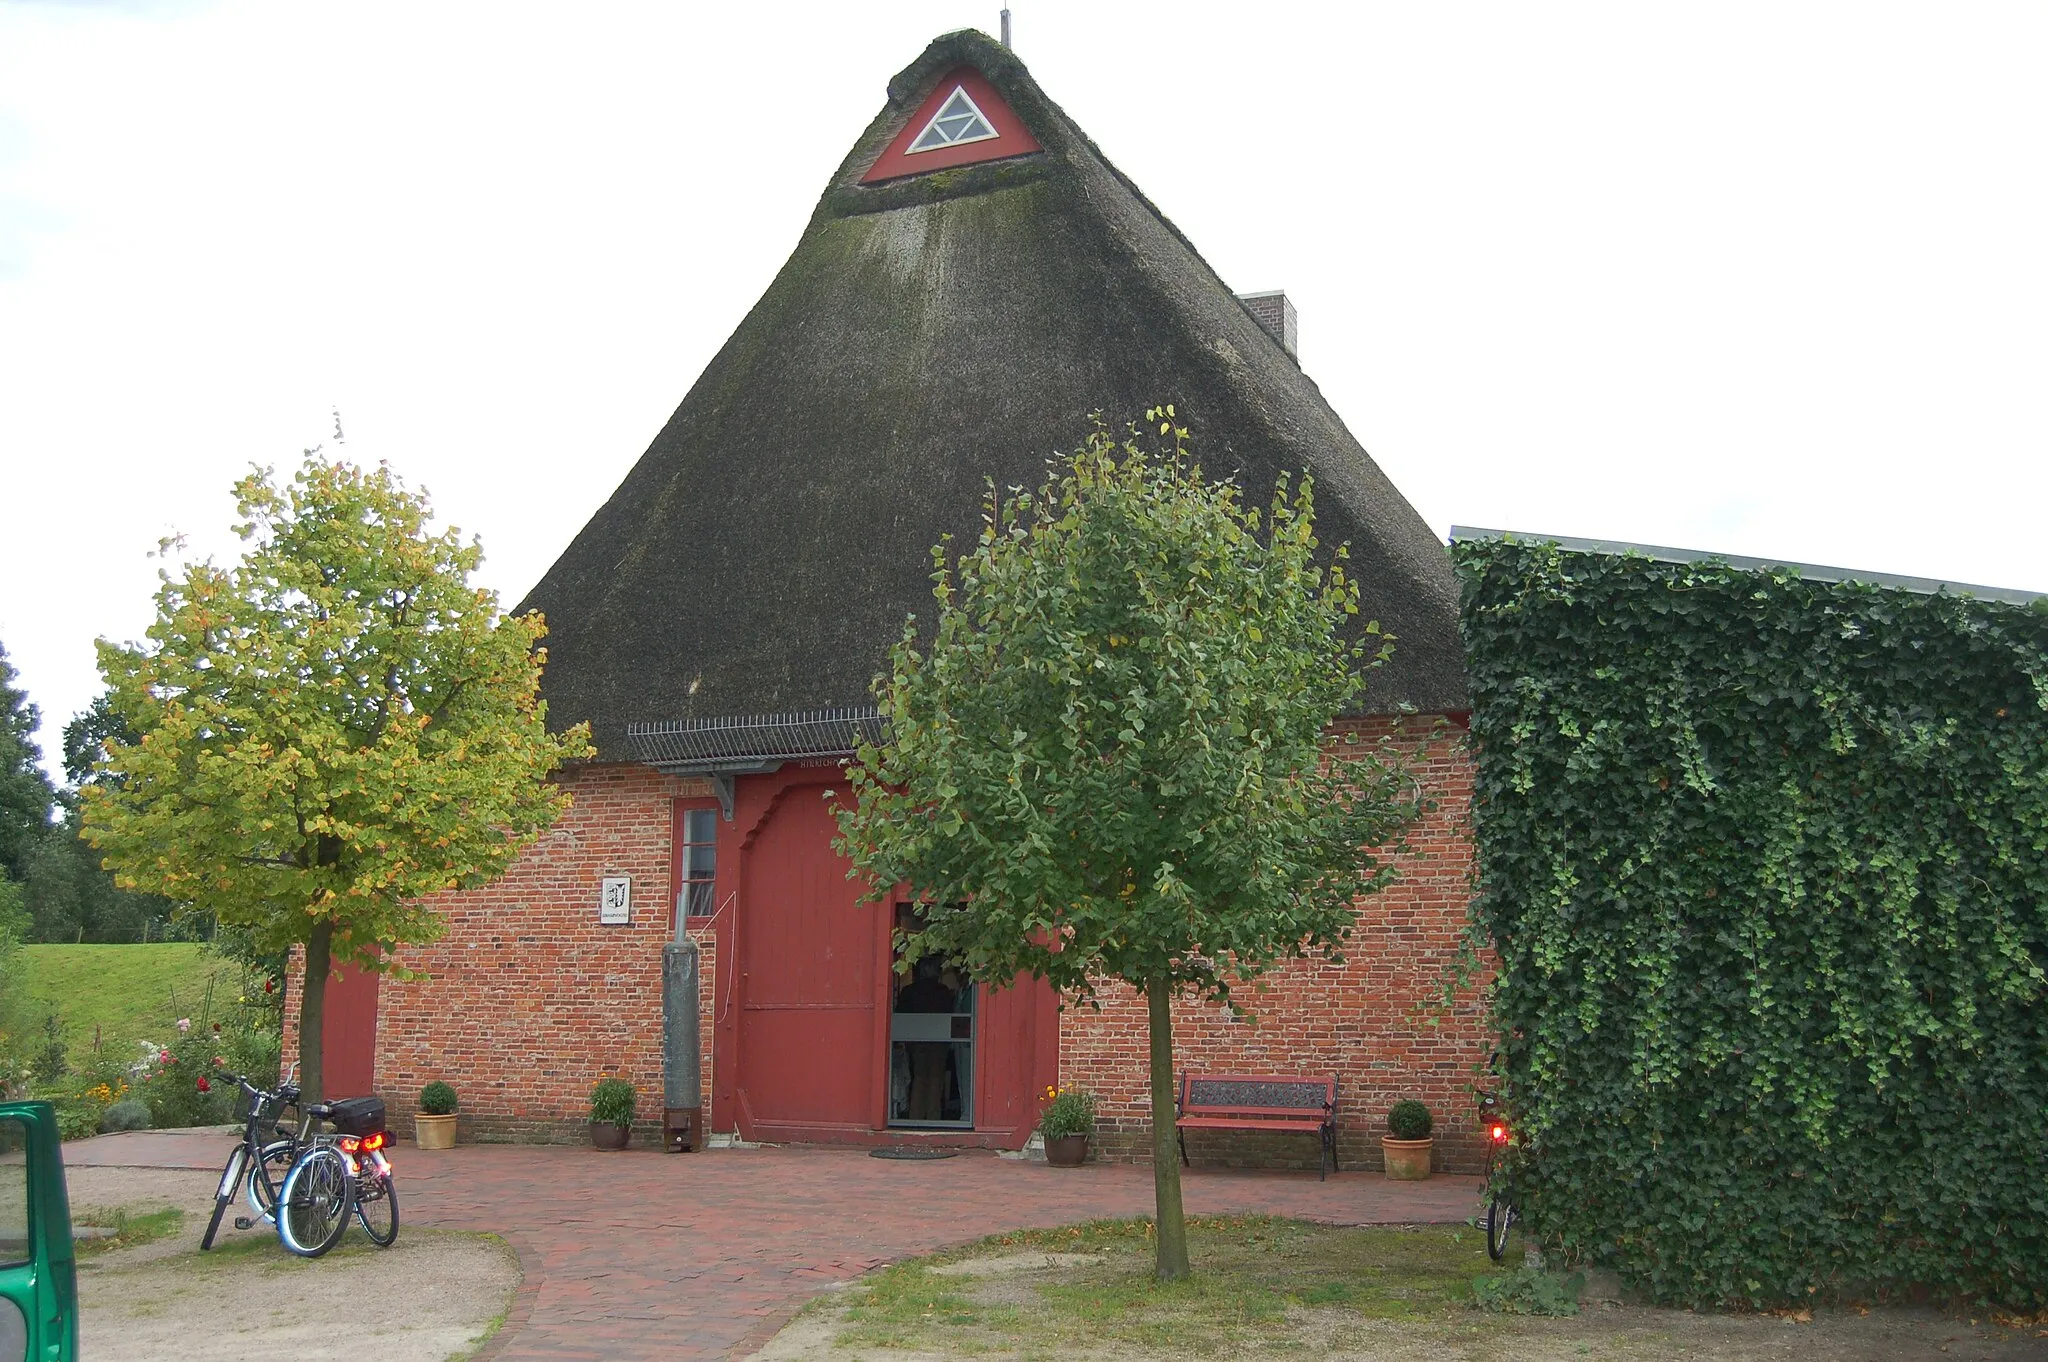 Photo showing: Historic Bandreißerkate in Haseldorf, Schleswig-Holstein, Germany. A small areal historic museum and location for weddings